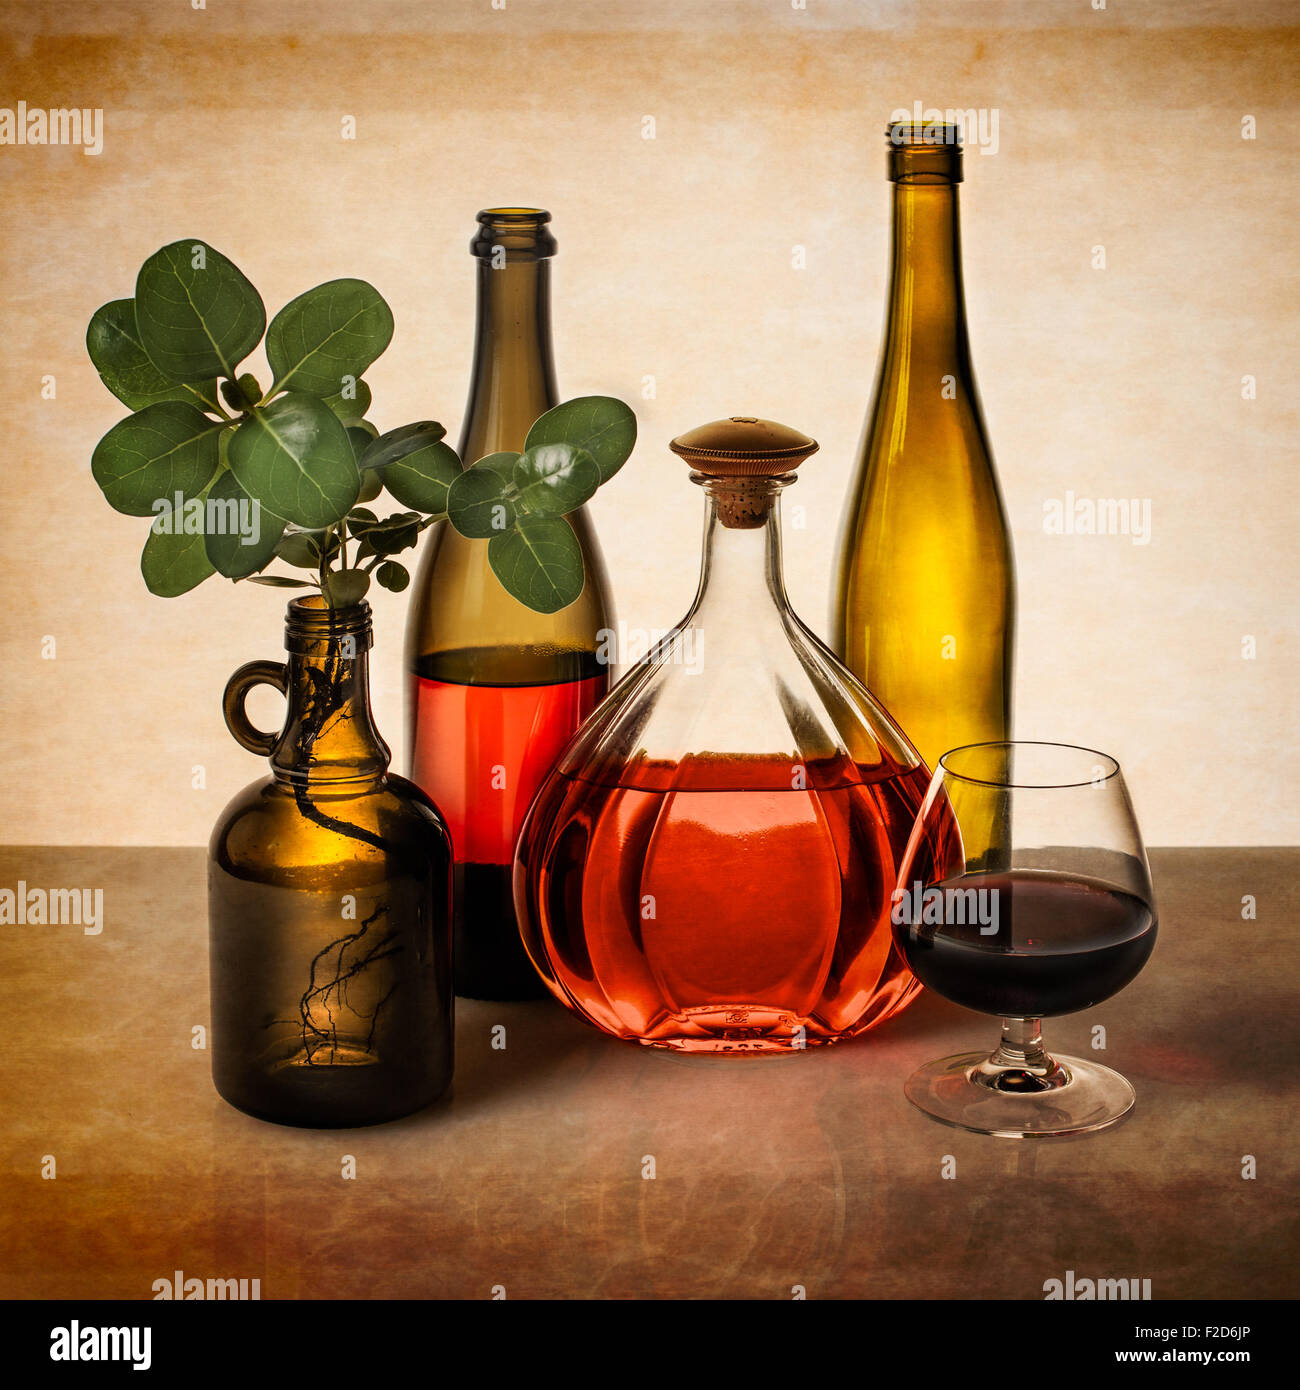 Still life with wine bottles and greenery Stock Photo